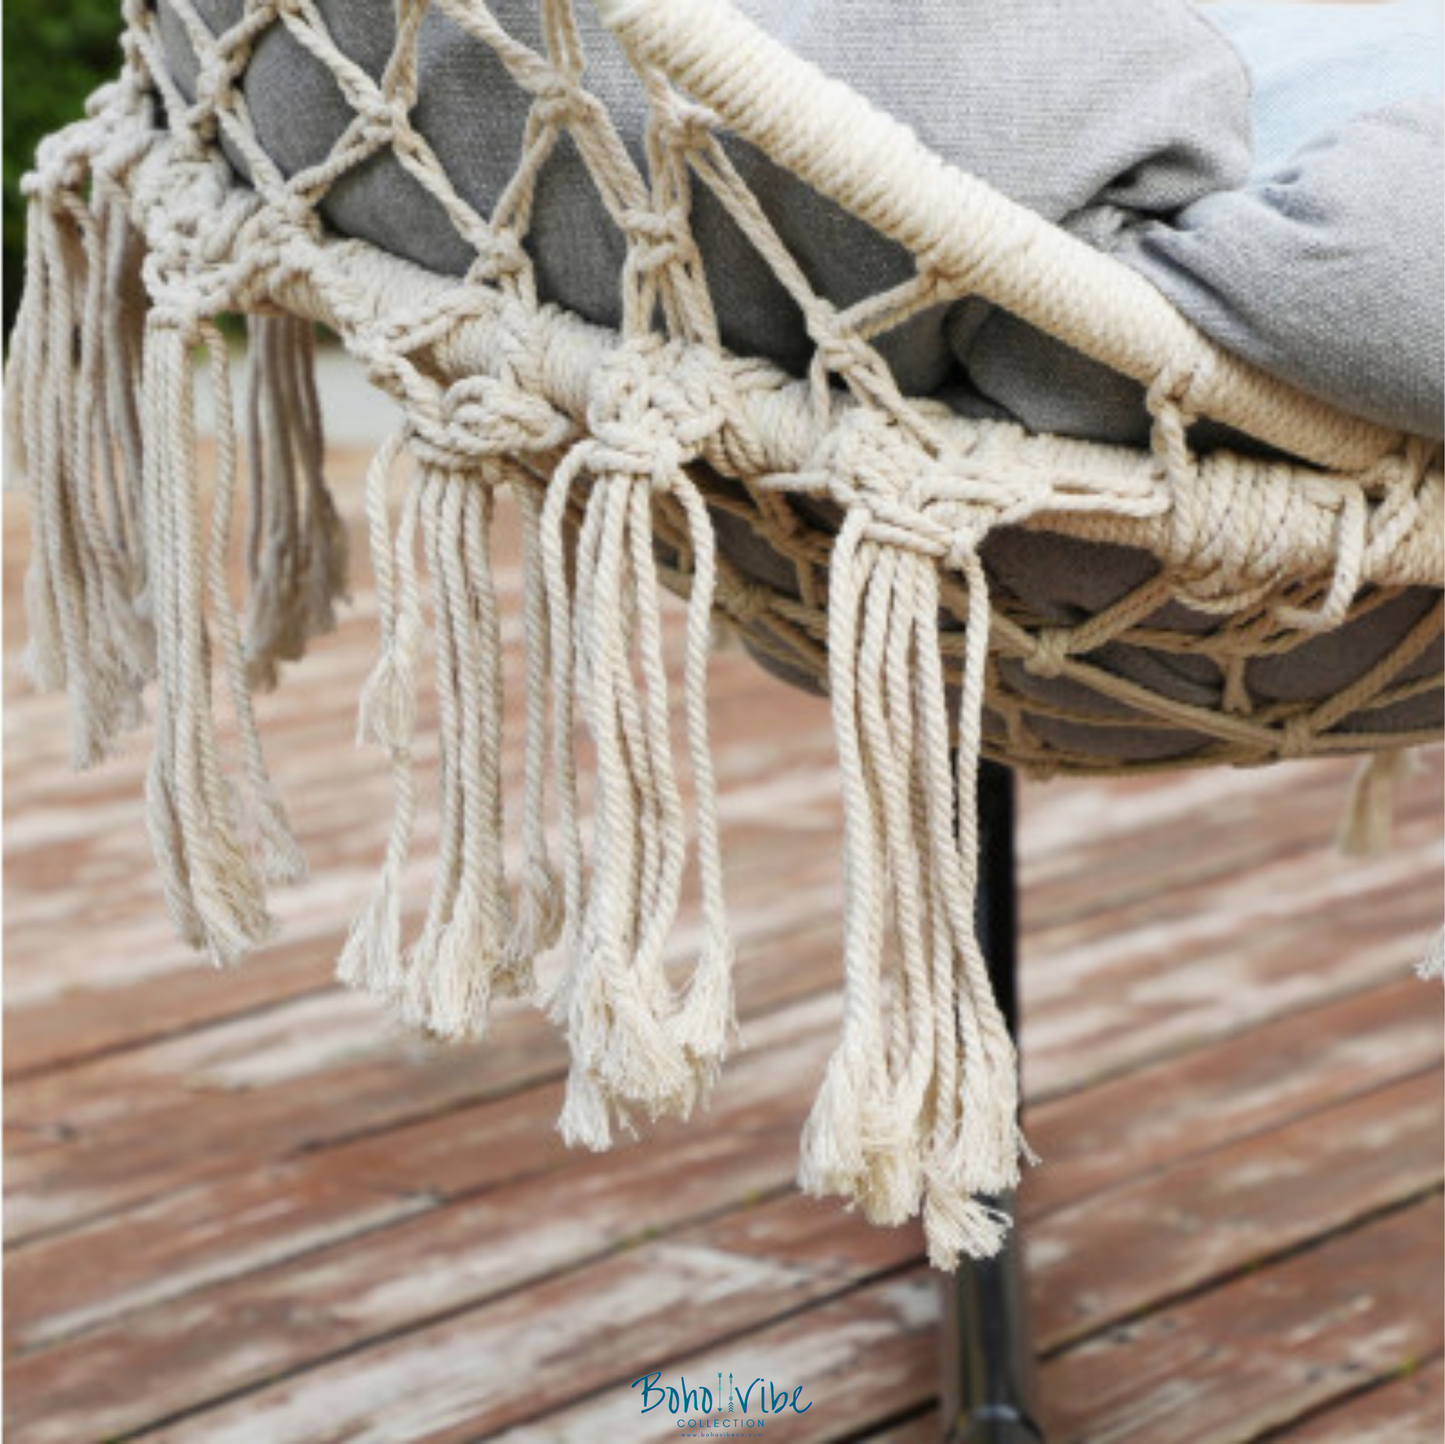 Boho ↡↟ Vibe Collection ↠ Bohemian Canvas Hanging Hammock Chair with Grey Cushion 